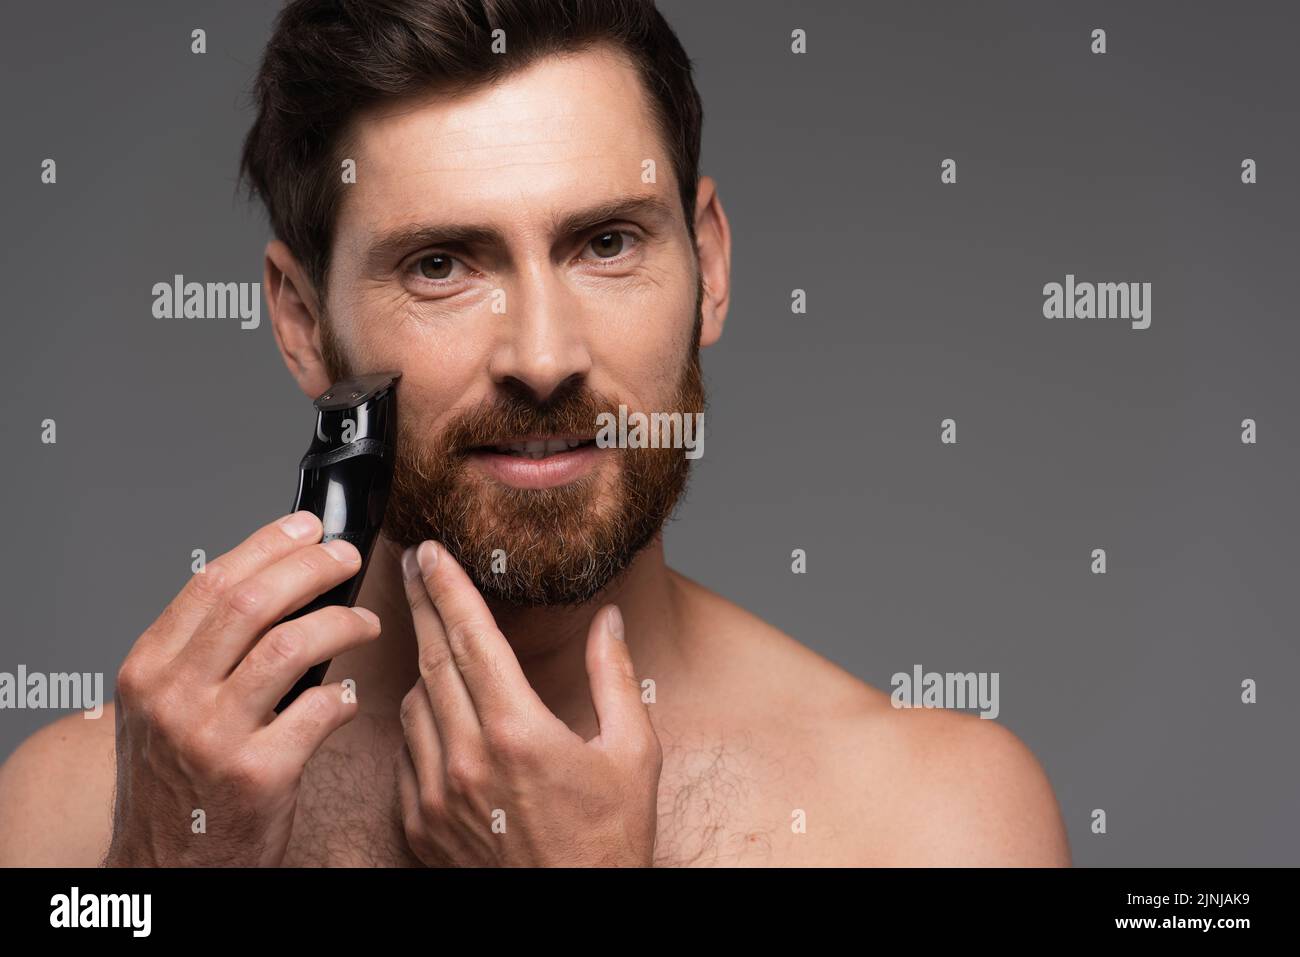 shirtless man with hair on chest shaving beard with electric razor isolated on grey,stock image Stock Photo